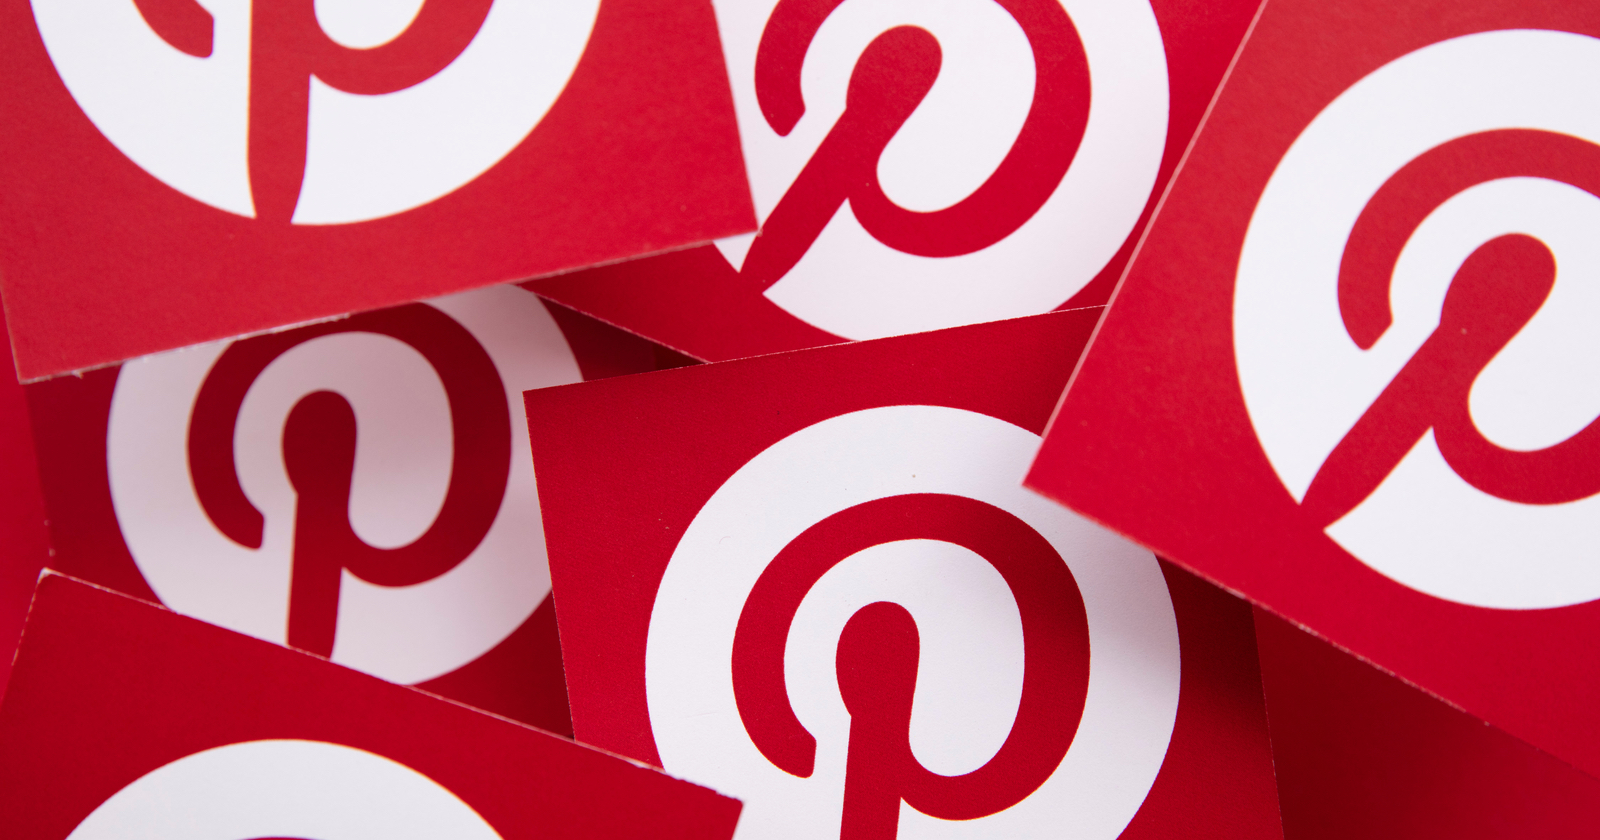 Tomaat toevoegen aan Bijdrager Pinterest Has a New Code of Conduct All Users Have to Follow